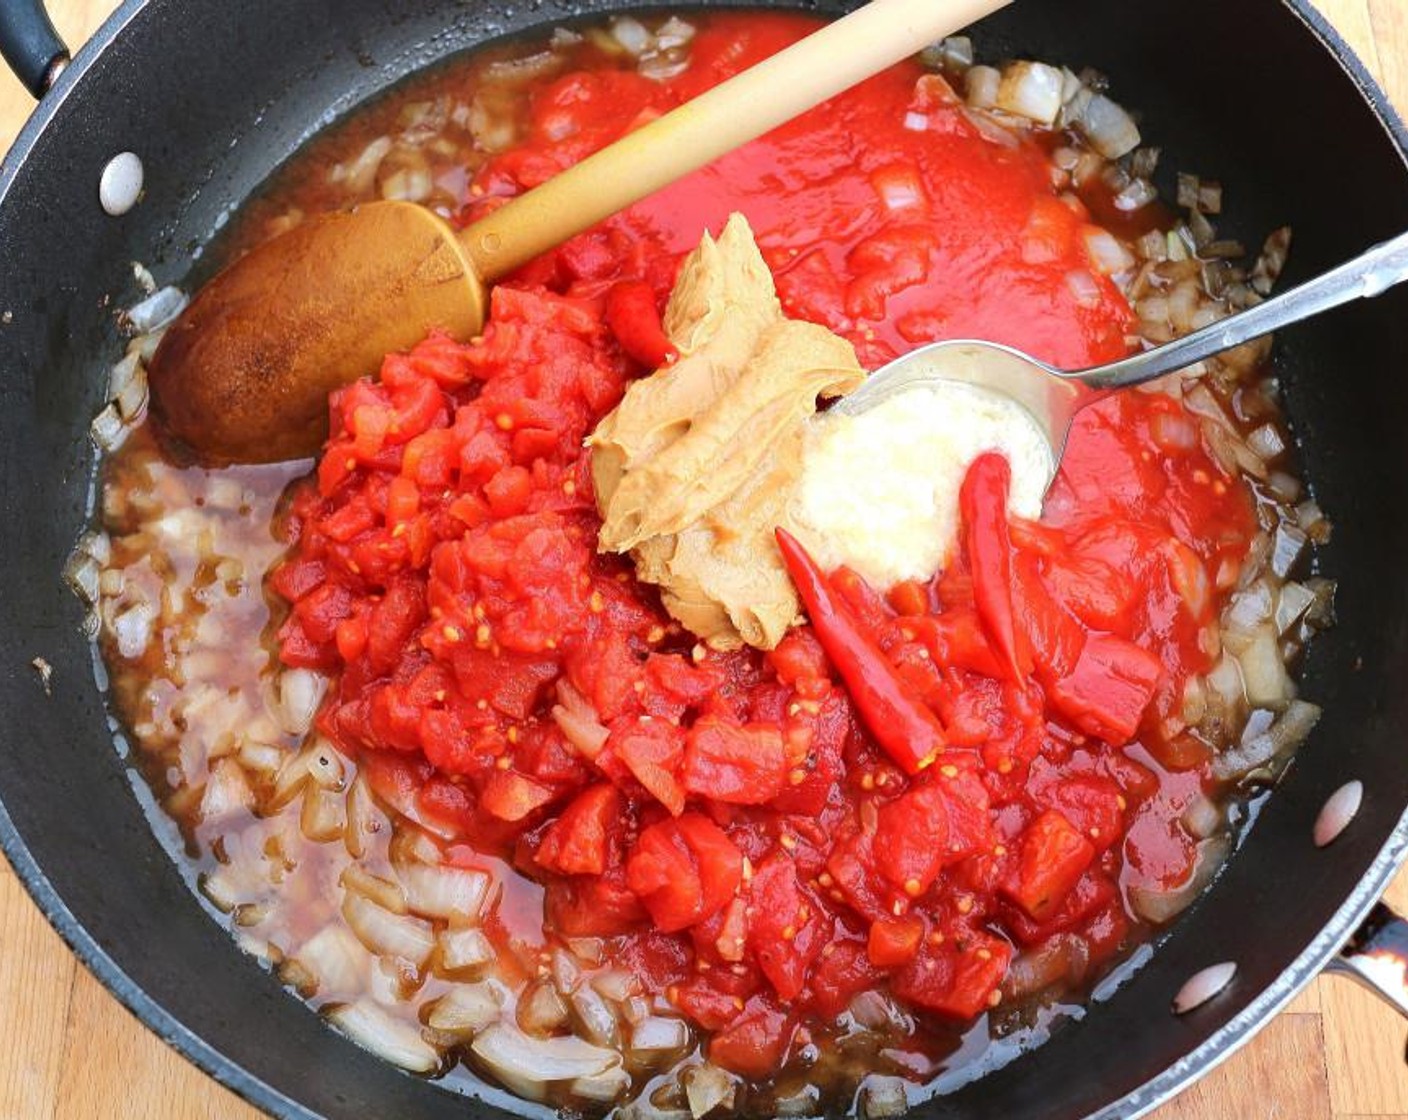 step 6 Add Canned Diced Tomatoes (1 1/4 cups), Canned Tomato Purée (1 cup), Peanut Butter (1/3 cup), Hot Chili Peppers (to taste), Garlic Paste (1 Tbsp), Kosher Salt (to taste) and Cayenne Pepper (to taste). Saute for 3 minutes until bubbly